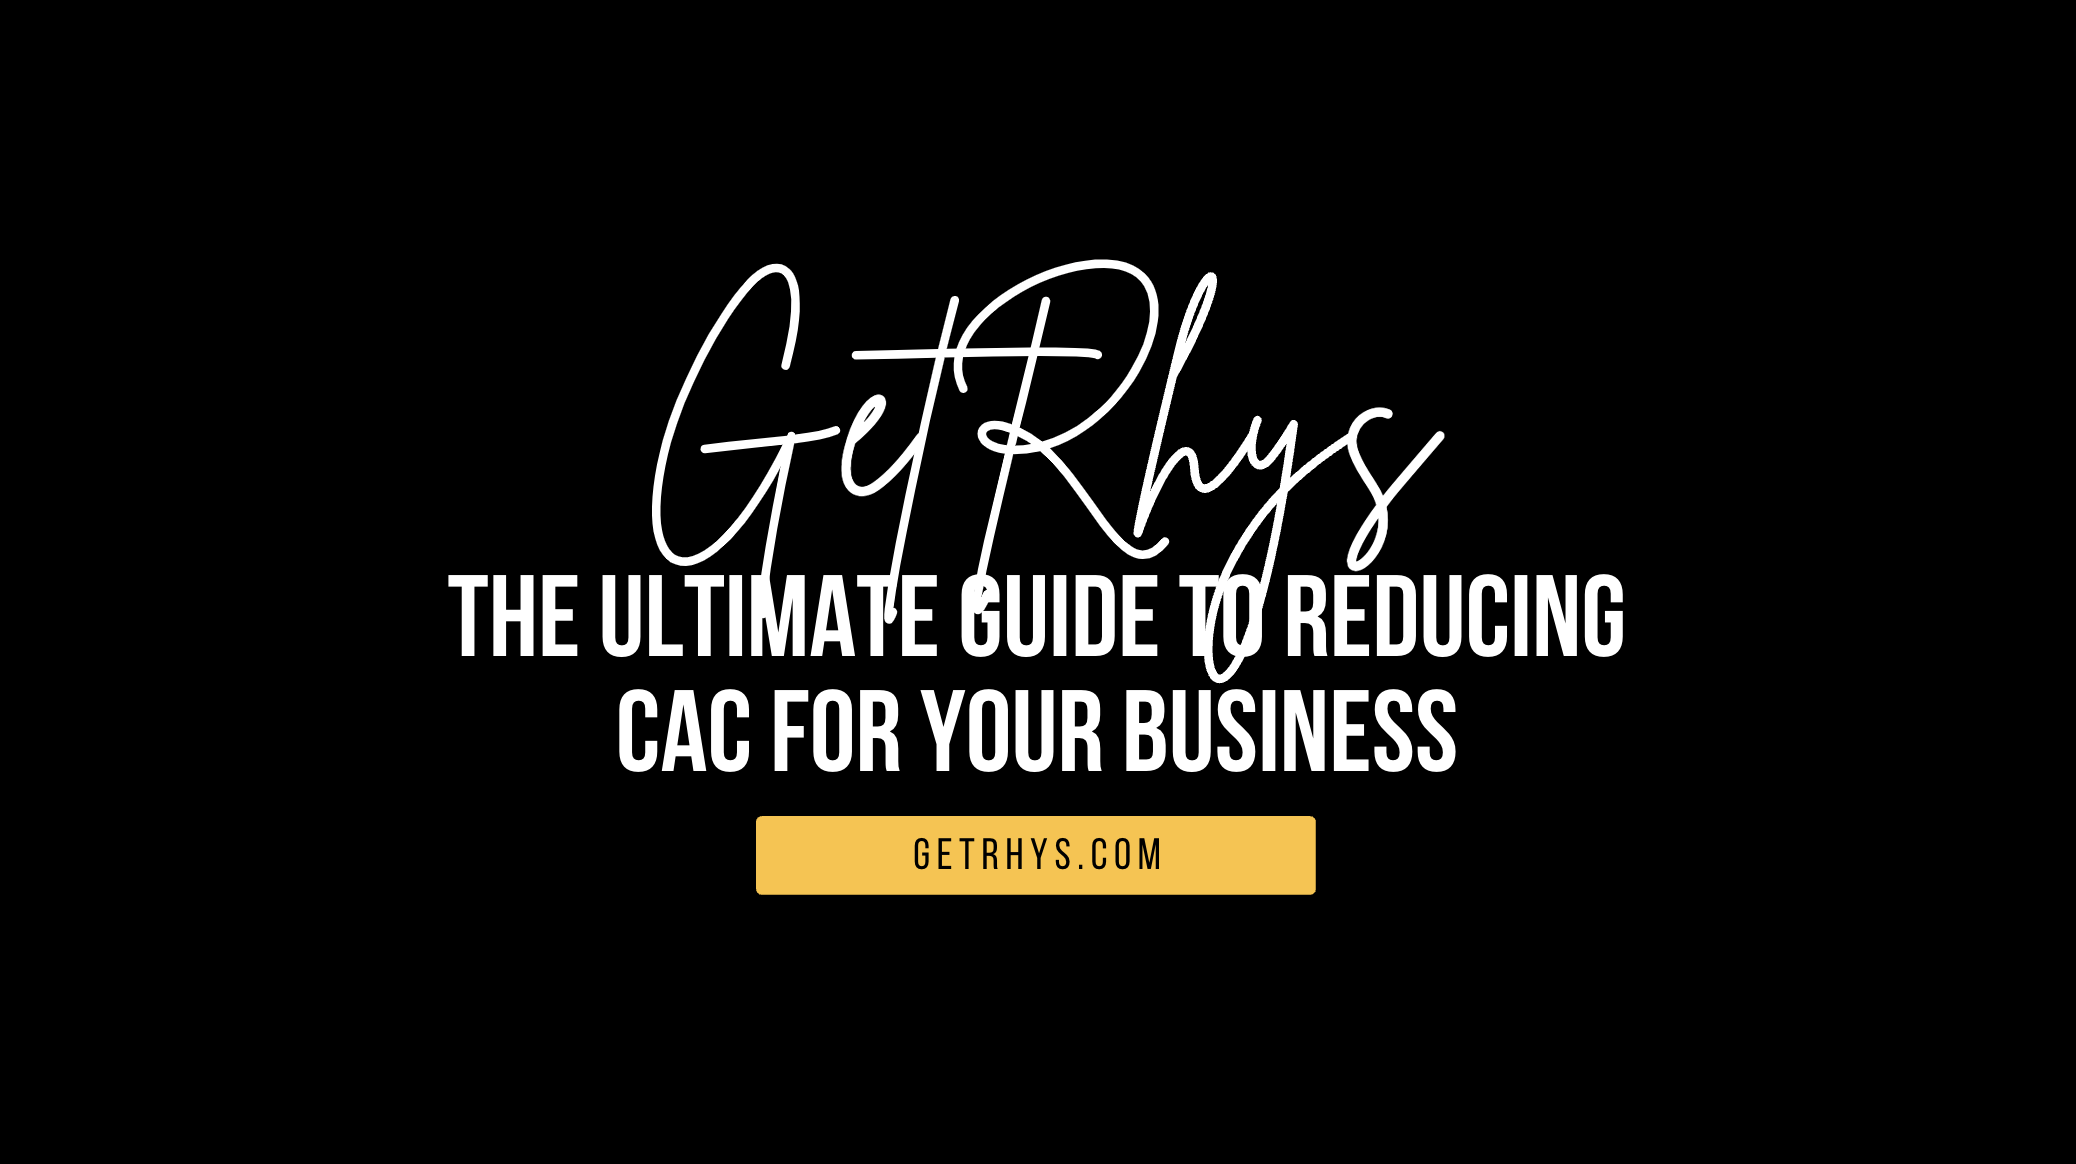 The ultimate guide to reducing CAC for your business